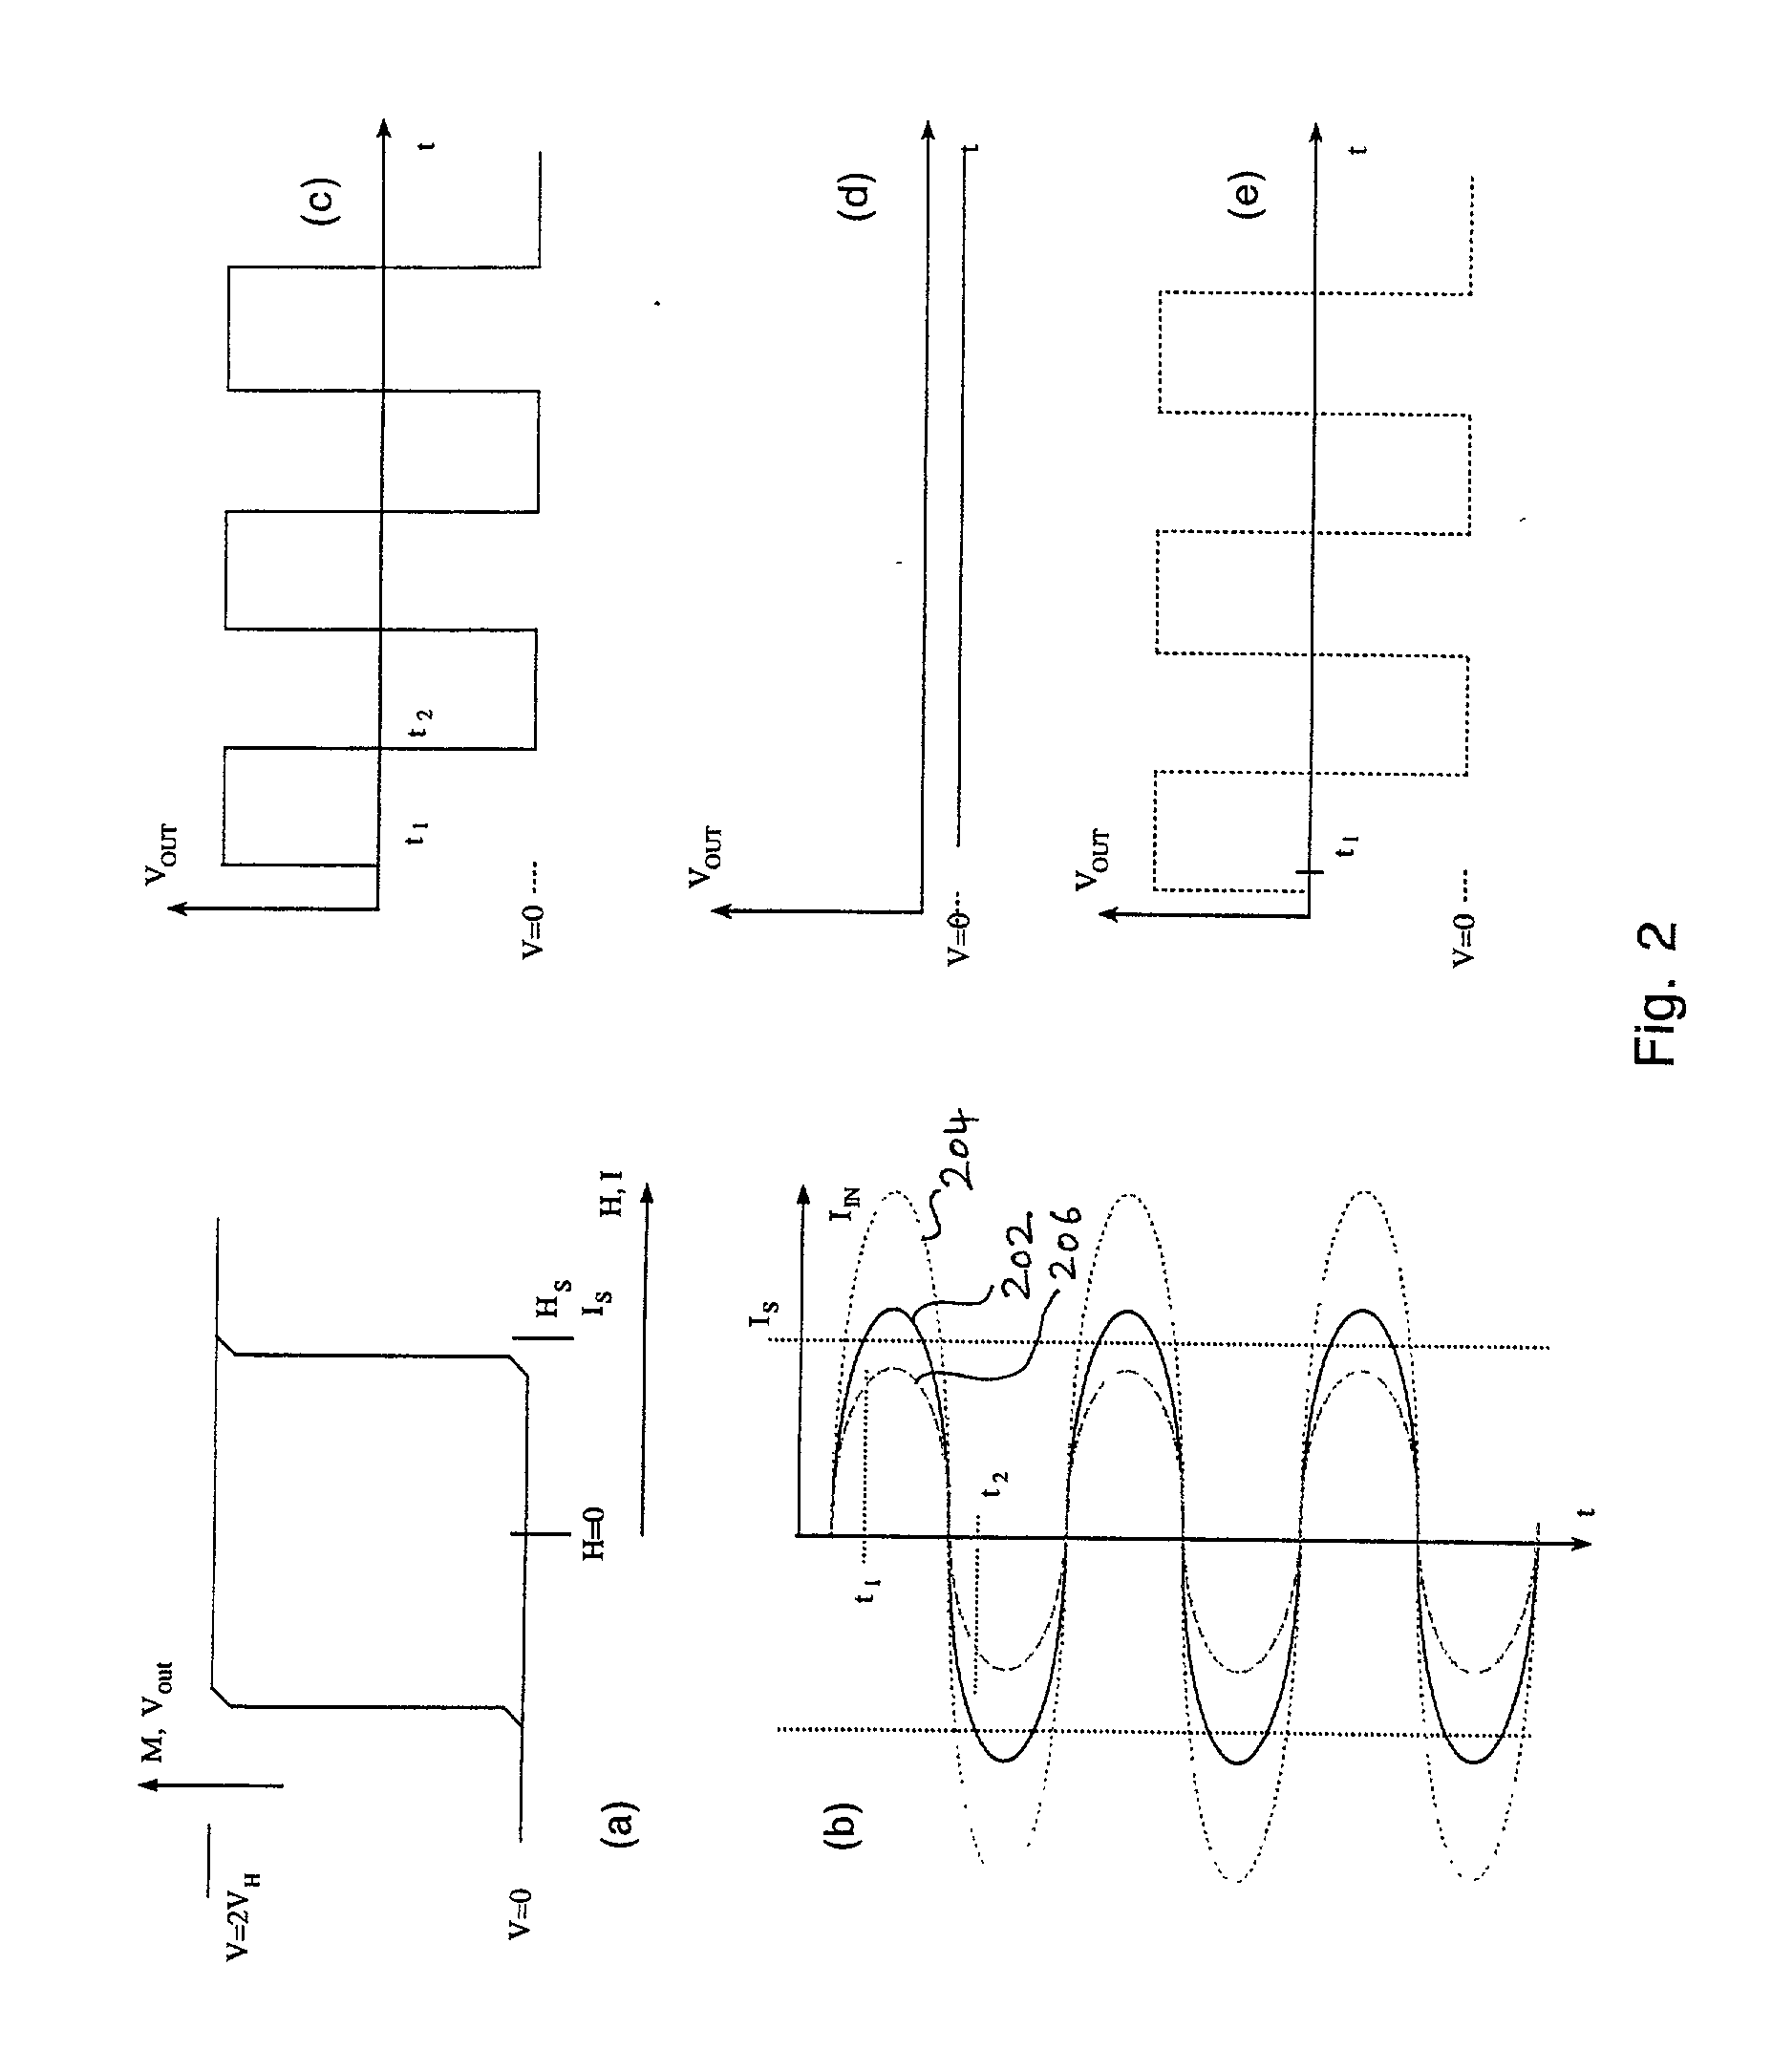 Comparator, Analog-to-Digital Converter and Method of Analog-to-Digital Conversion Using Non-Linear Magneto-Electronic Device